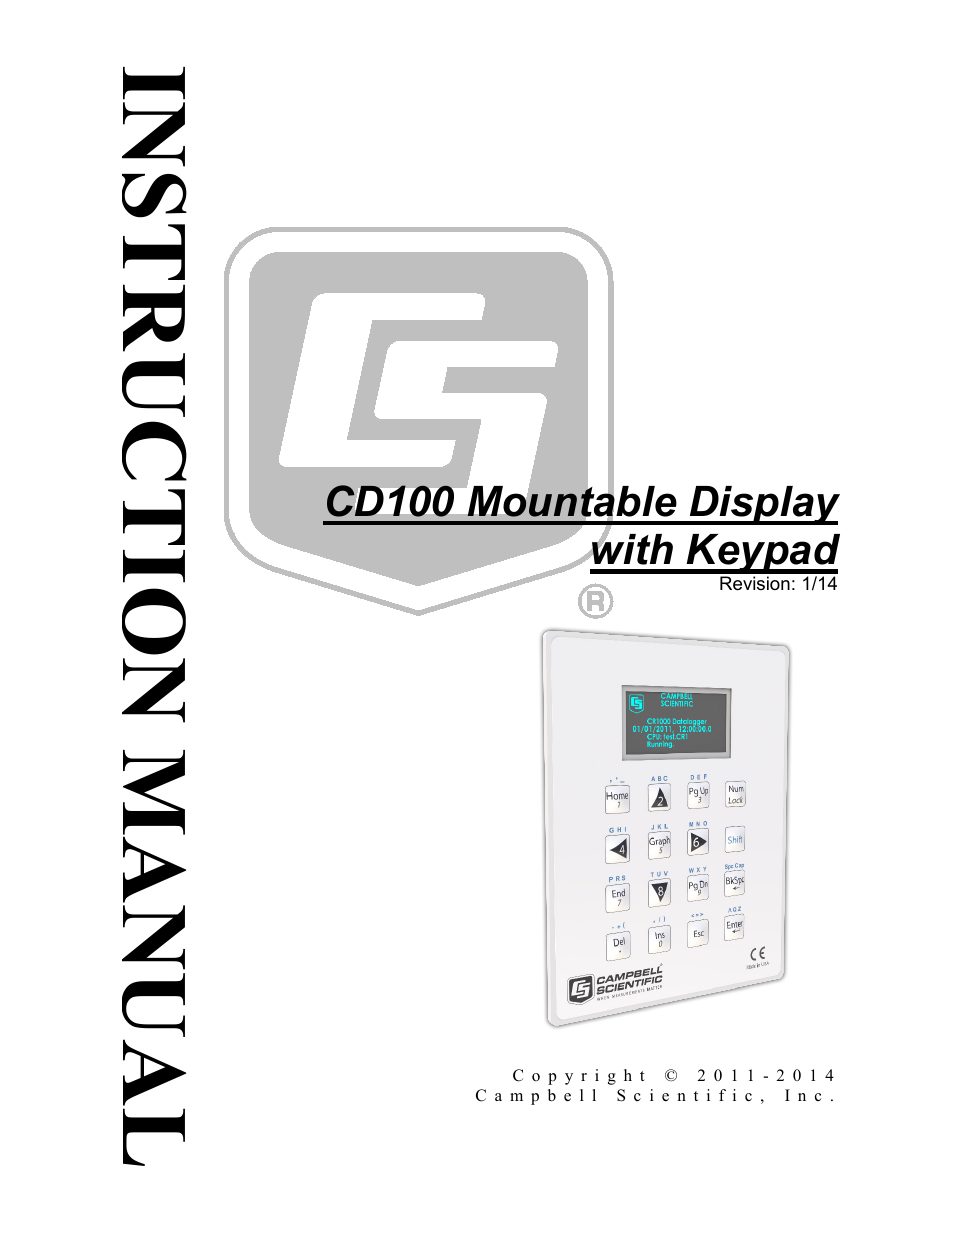 Campbell Scientific CD100 Mountable Display with Keypad User Manual | 16 pages